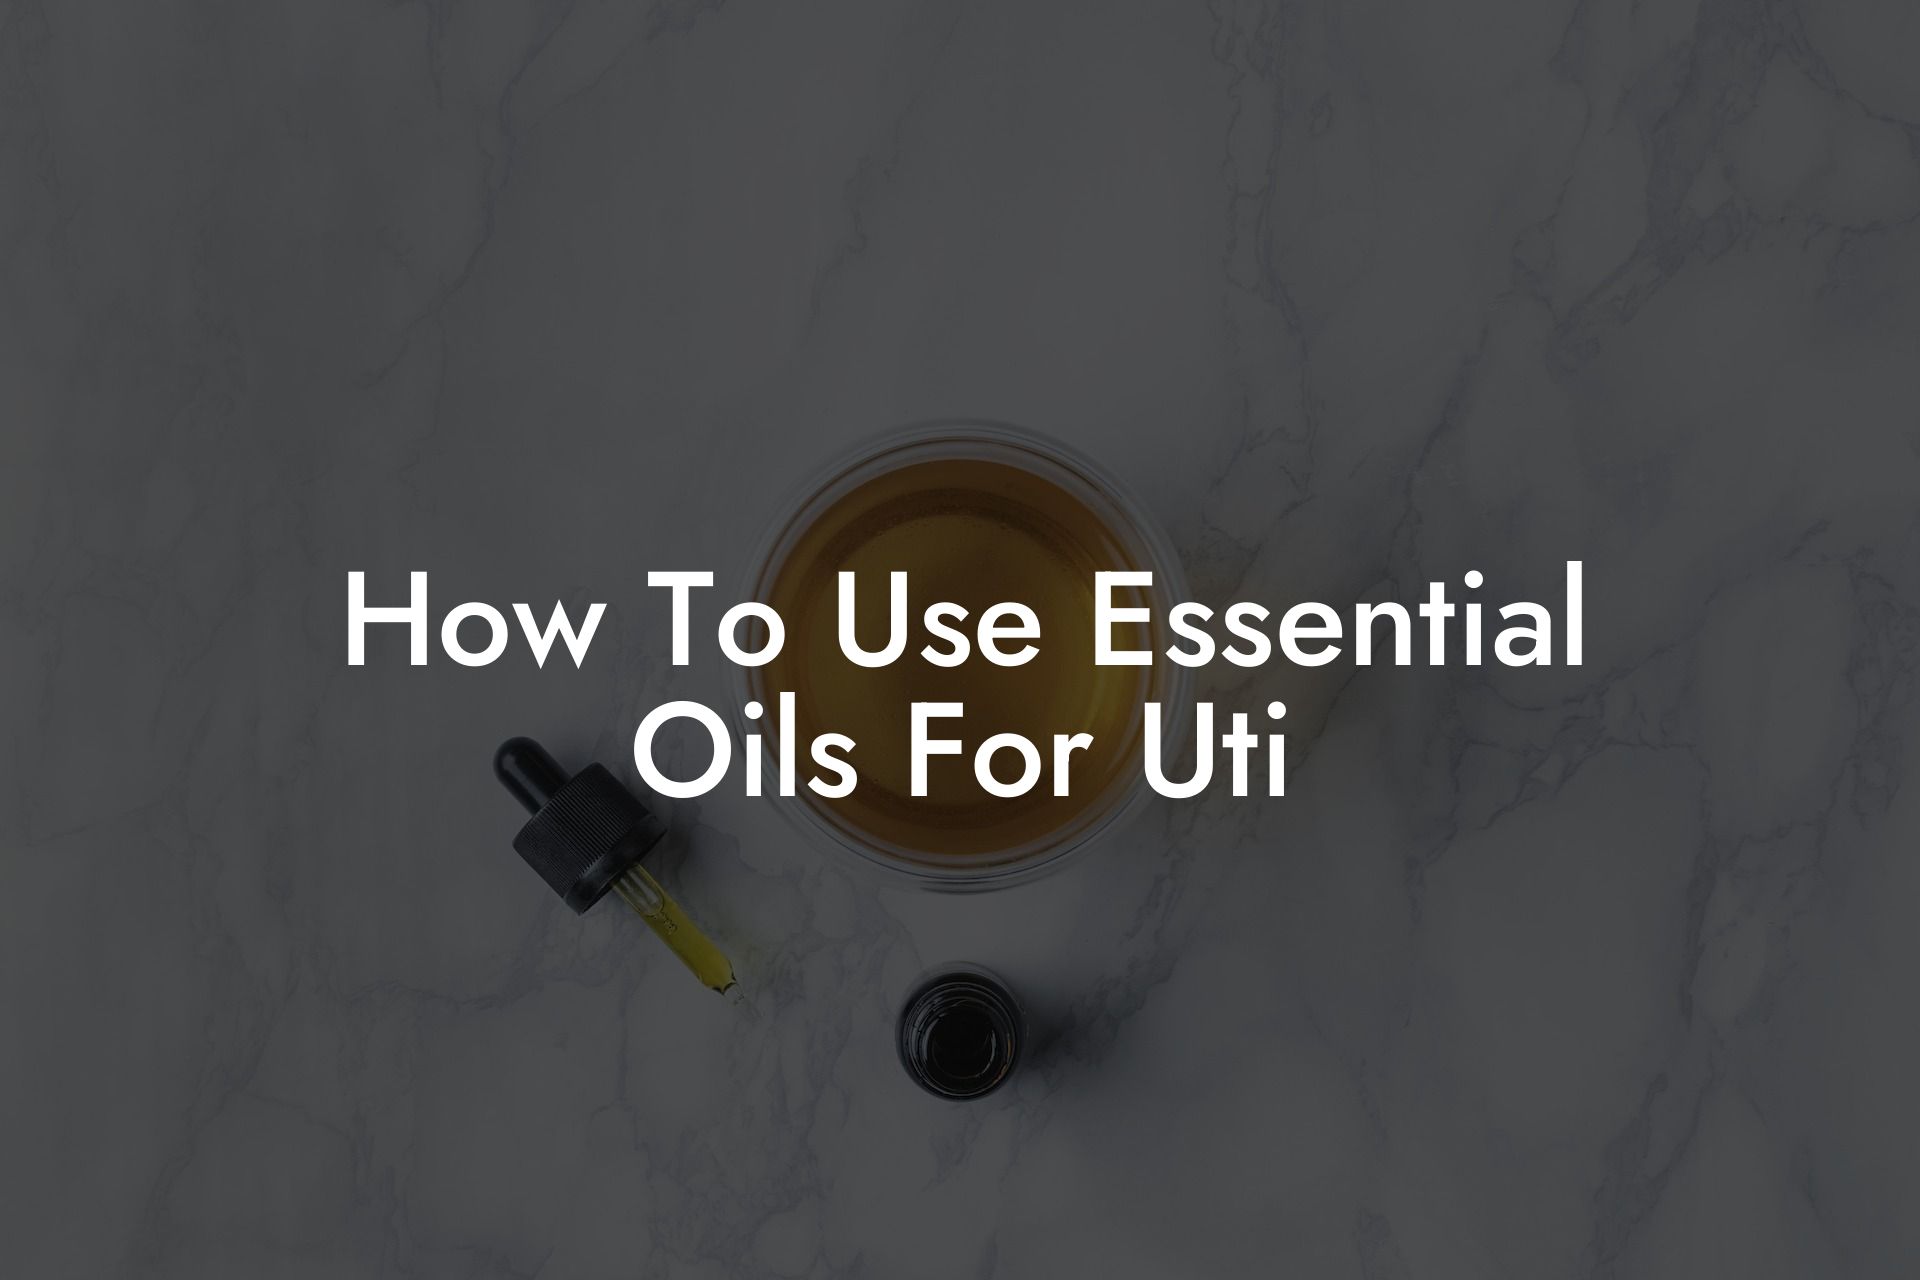 How To Use Essential Oils For Uti